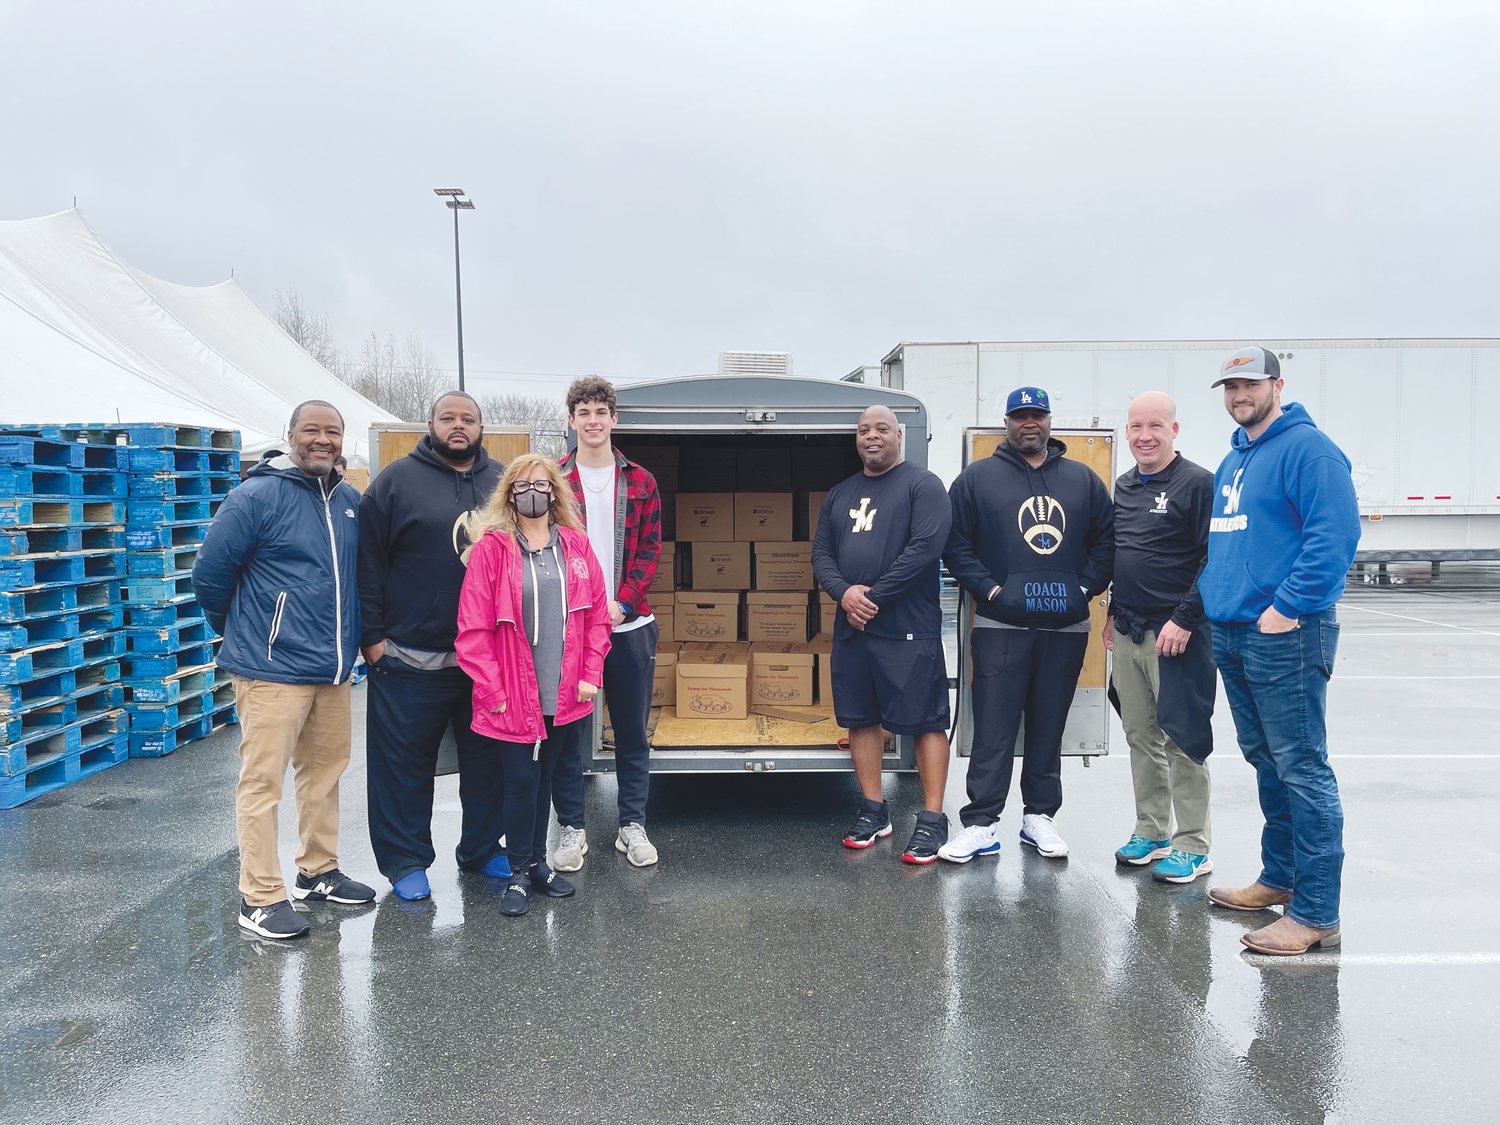 Jordan-Matthews volunteers (from left to right: Rodney Wiley, Ryan Johnson, Donna Barger (in pink), Calvin Schwartz, Kenyon Burns, Coach Mason, Chip Millard and Josh Harris) pose for a photo beside the loaded trailer full of holiday boxes from Mountaire for their 'Christmas for Thousands' giveaway on Dec. 11.